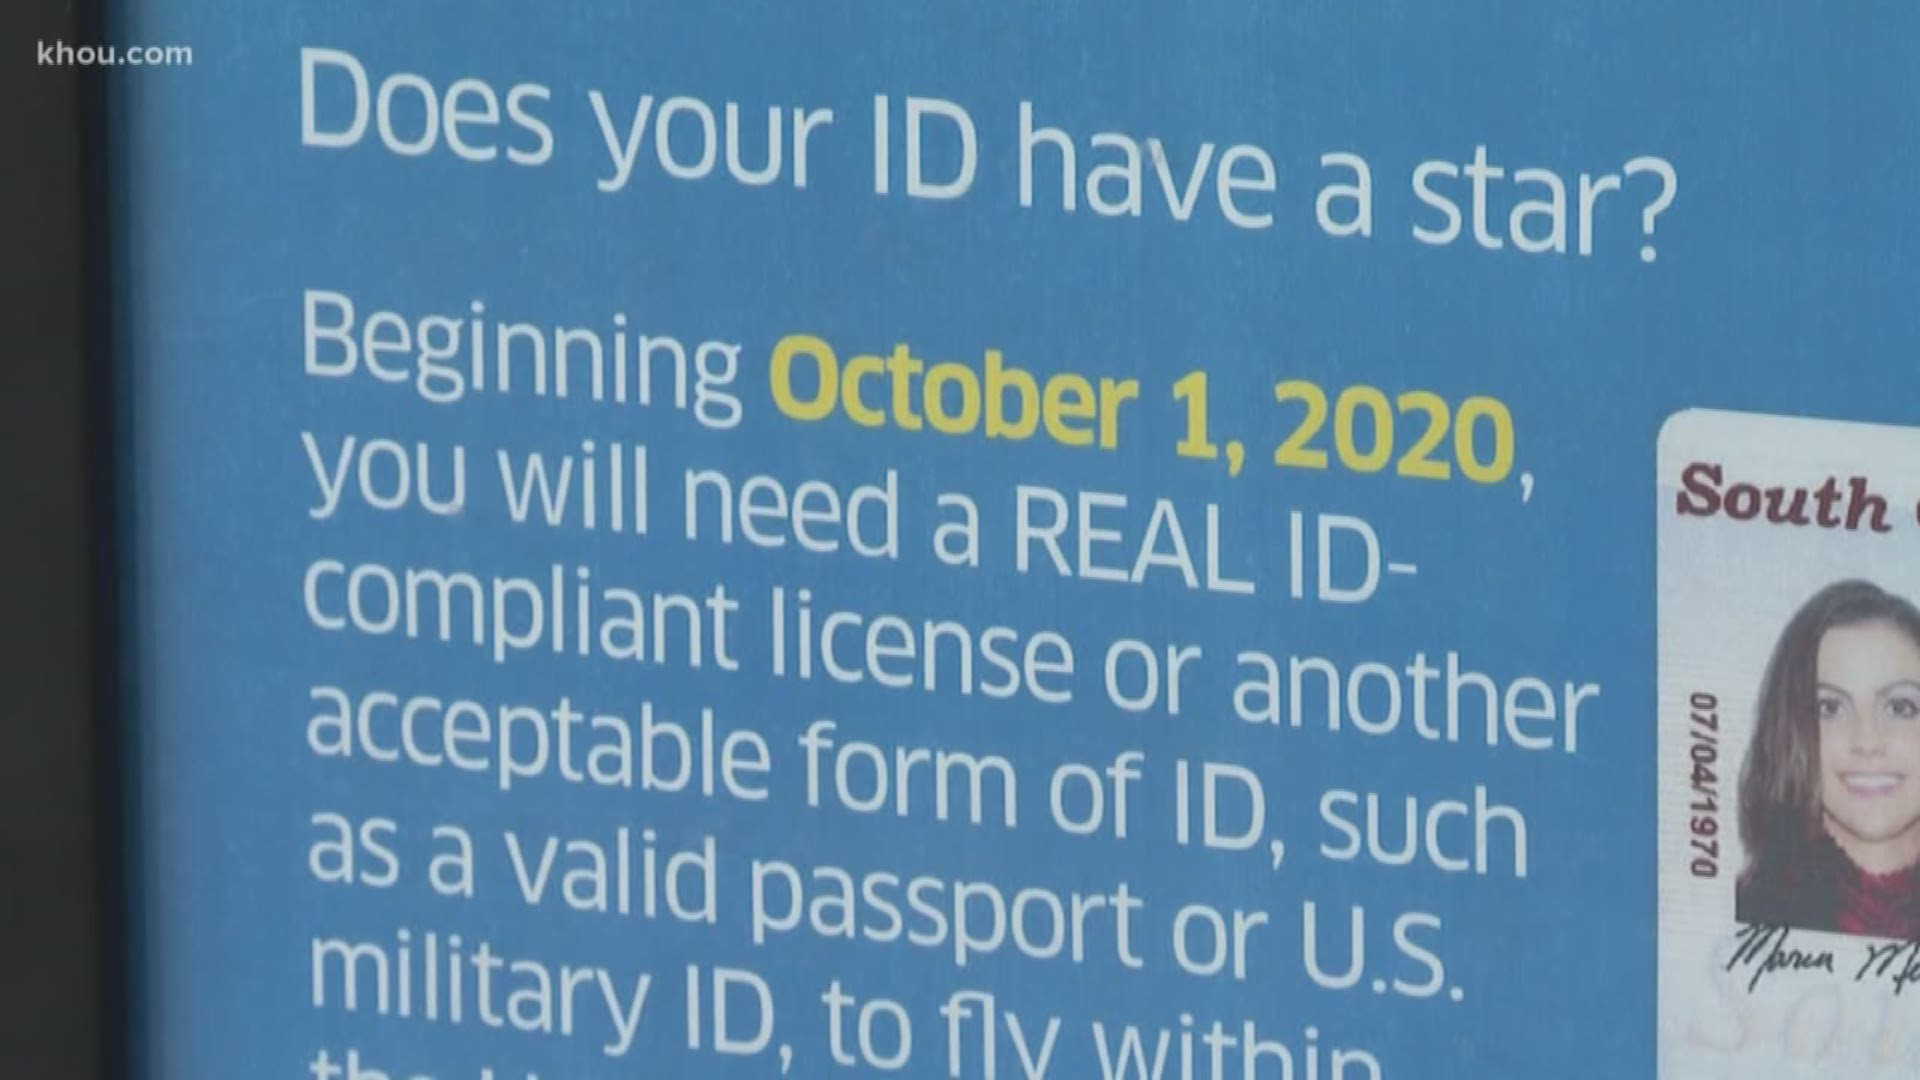 The Transportation Safety Administration is reminding everyone that changes are coming to ID requirements.